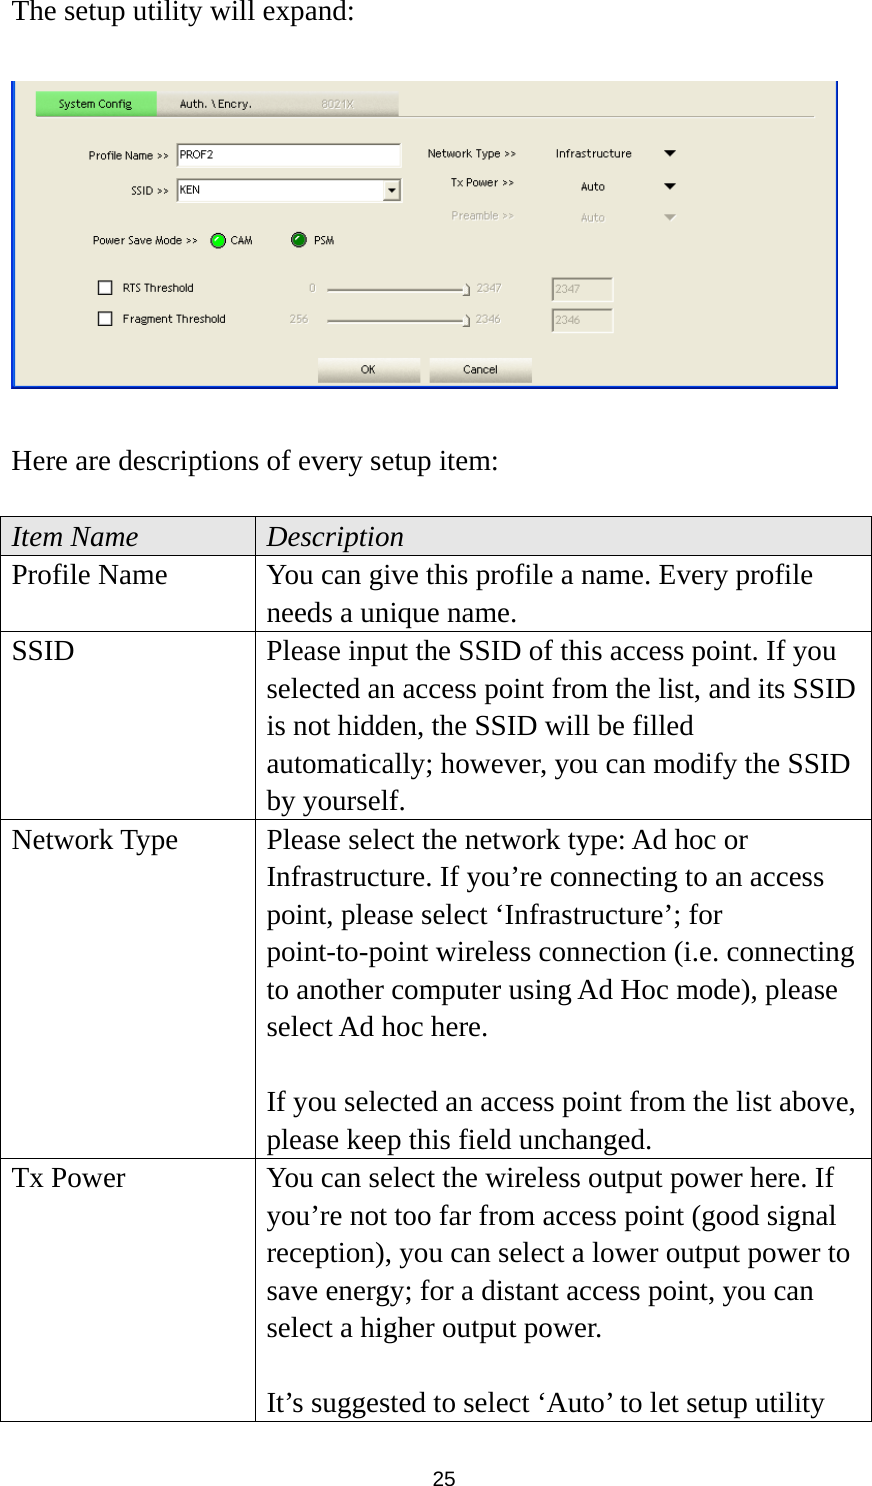  25 The setup utility will expand:    Here are descriptions of every setup item:  Item Name  Description Profile Name  You can give this profile a name. Every profile needs a unique name. SSID  Please input the SSID of this access point. If you selected an access point from the list, and its SSID is not hidden, the SSID will be filled automatically; however, you can modify the SSID by yourself. Network Type  Please select the network type: Ad hoc or Infrastructure. If you’re connecting to an access point, please select ‘Infrastructure’; for point-to-point wireless connection (i.e. connecting to another computer using Ad Hoc mode), please select Ad hoc here.  If you selected an access point from the list above, please keep this field unchanged. Tx Power  You can select the wireless output power here. If you’re not too far from access point (good signal reception), you can select a lower output power to save energy; for a distant access point, you can select a higher output power.    It’s suggested to select ‘Auto’ to let setup utility 